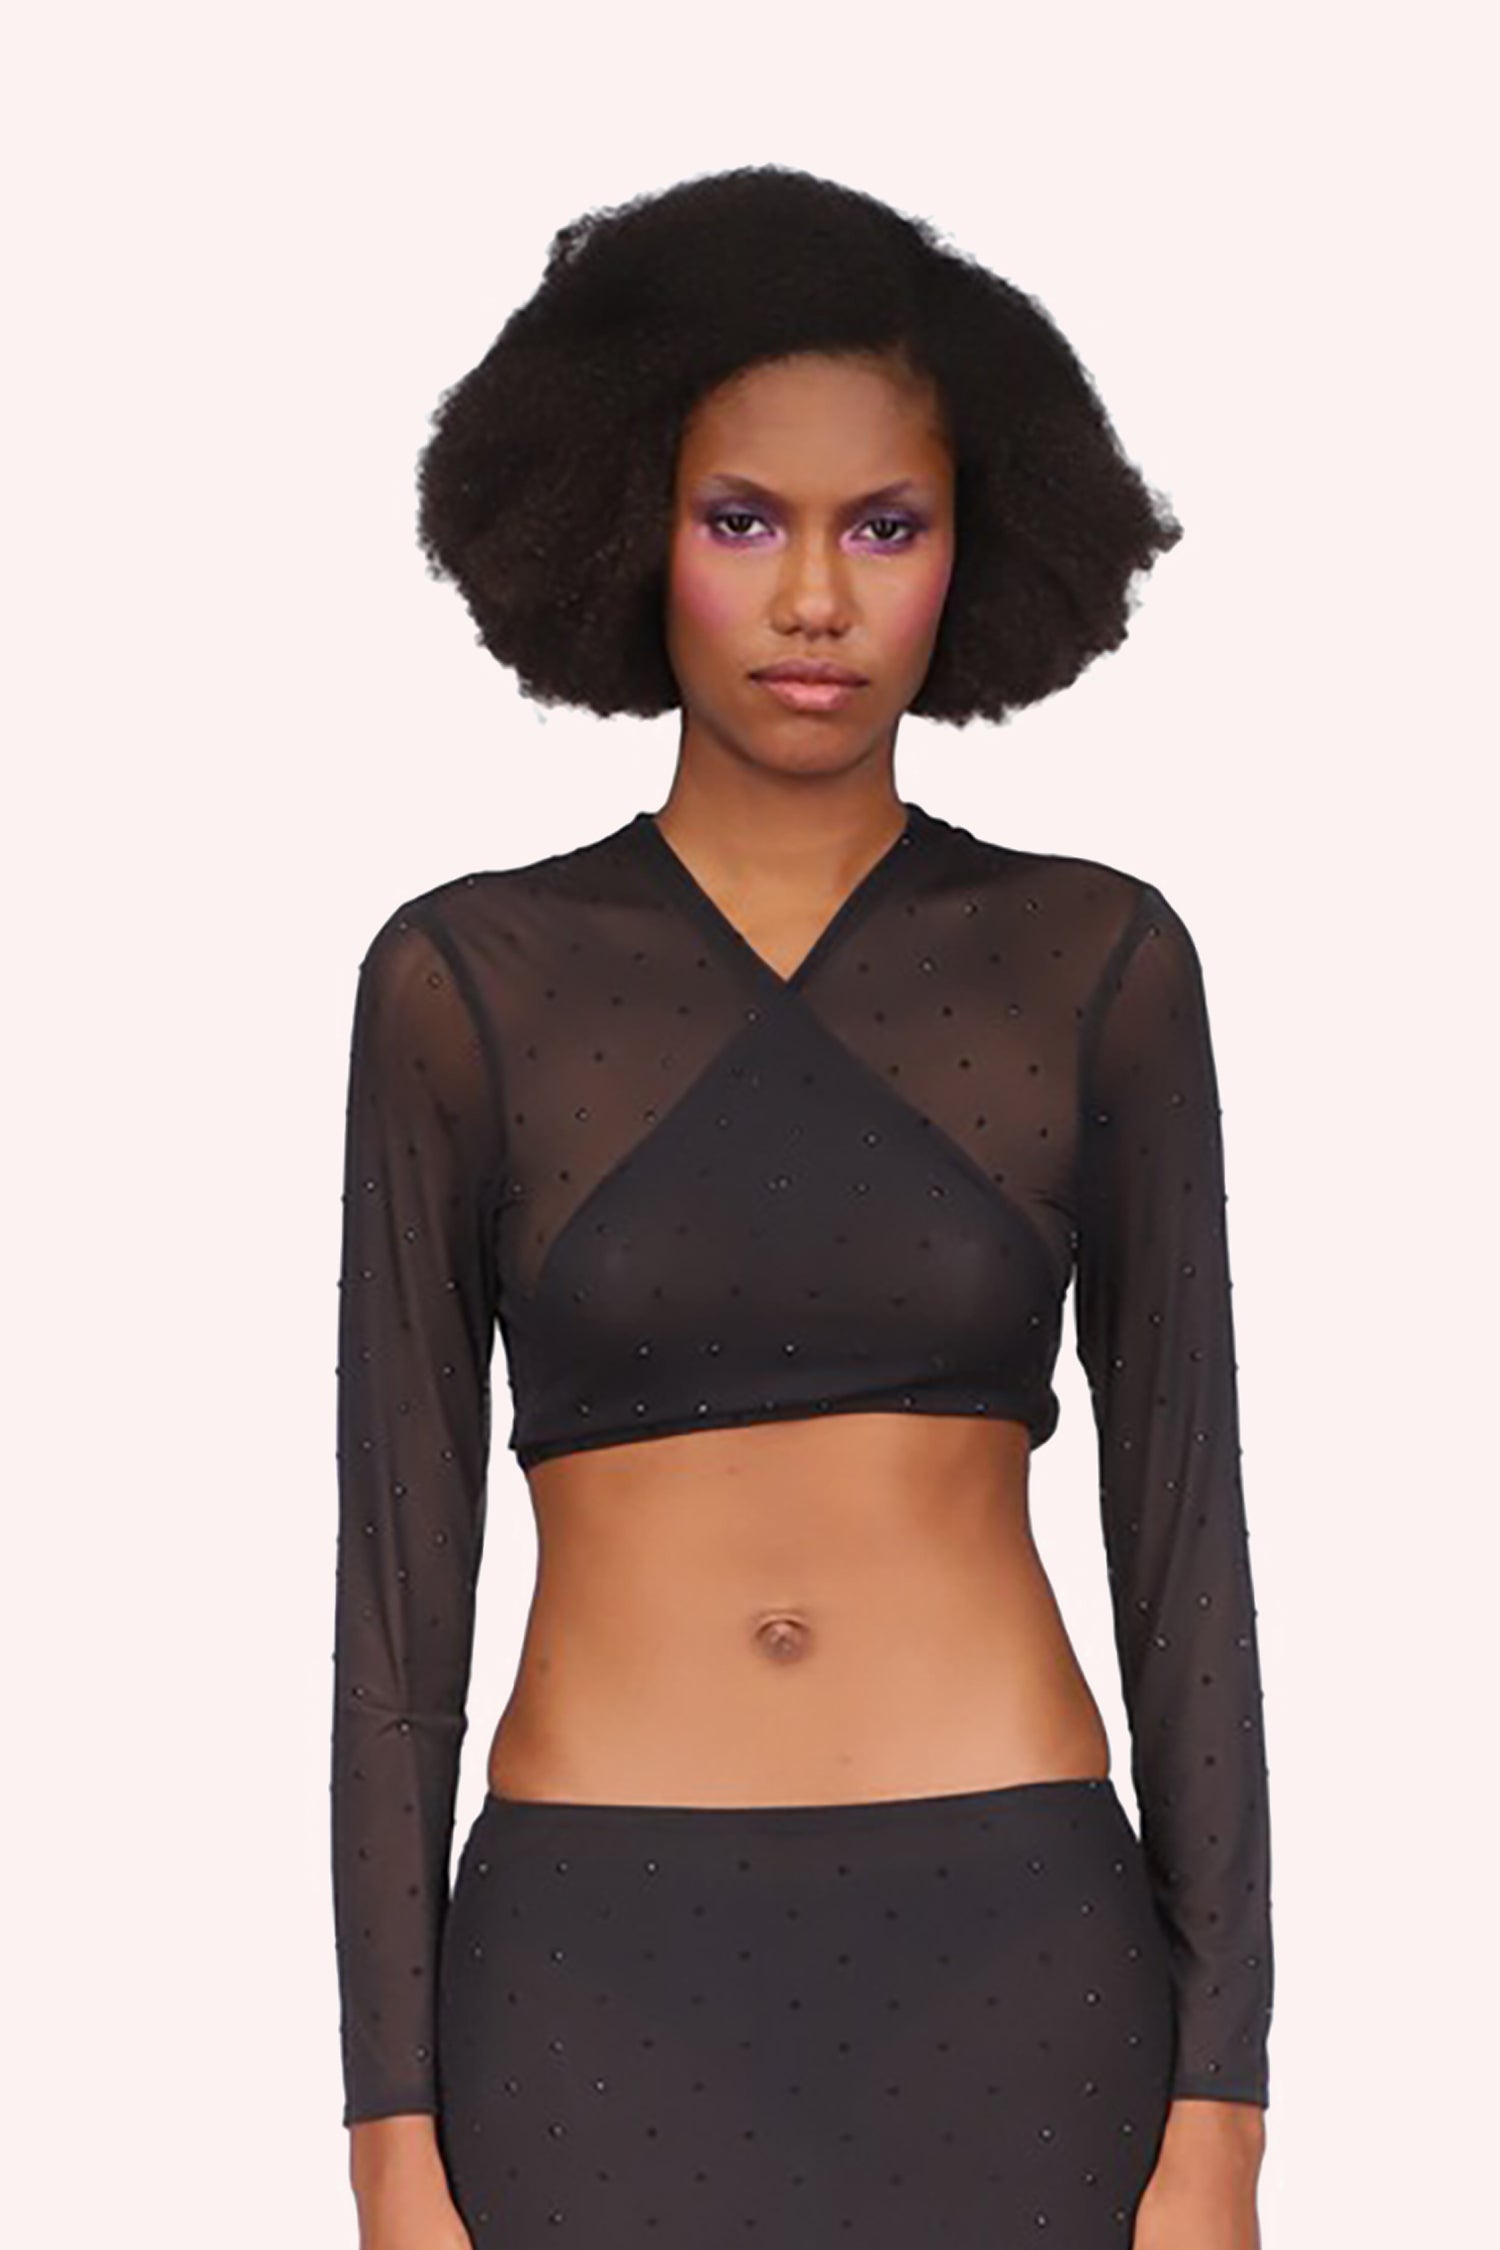 Rhinestone Mesh Tie Top Black in diagonal cross over, brown and transparent color, adorned with shiny black beads